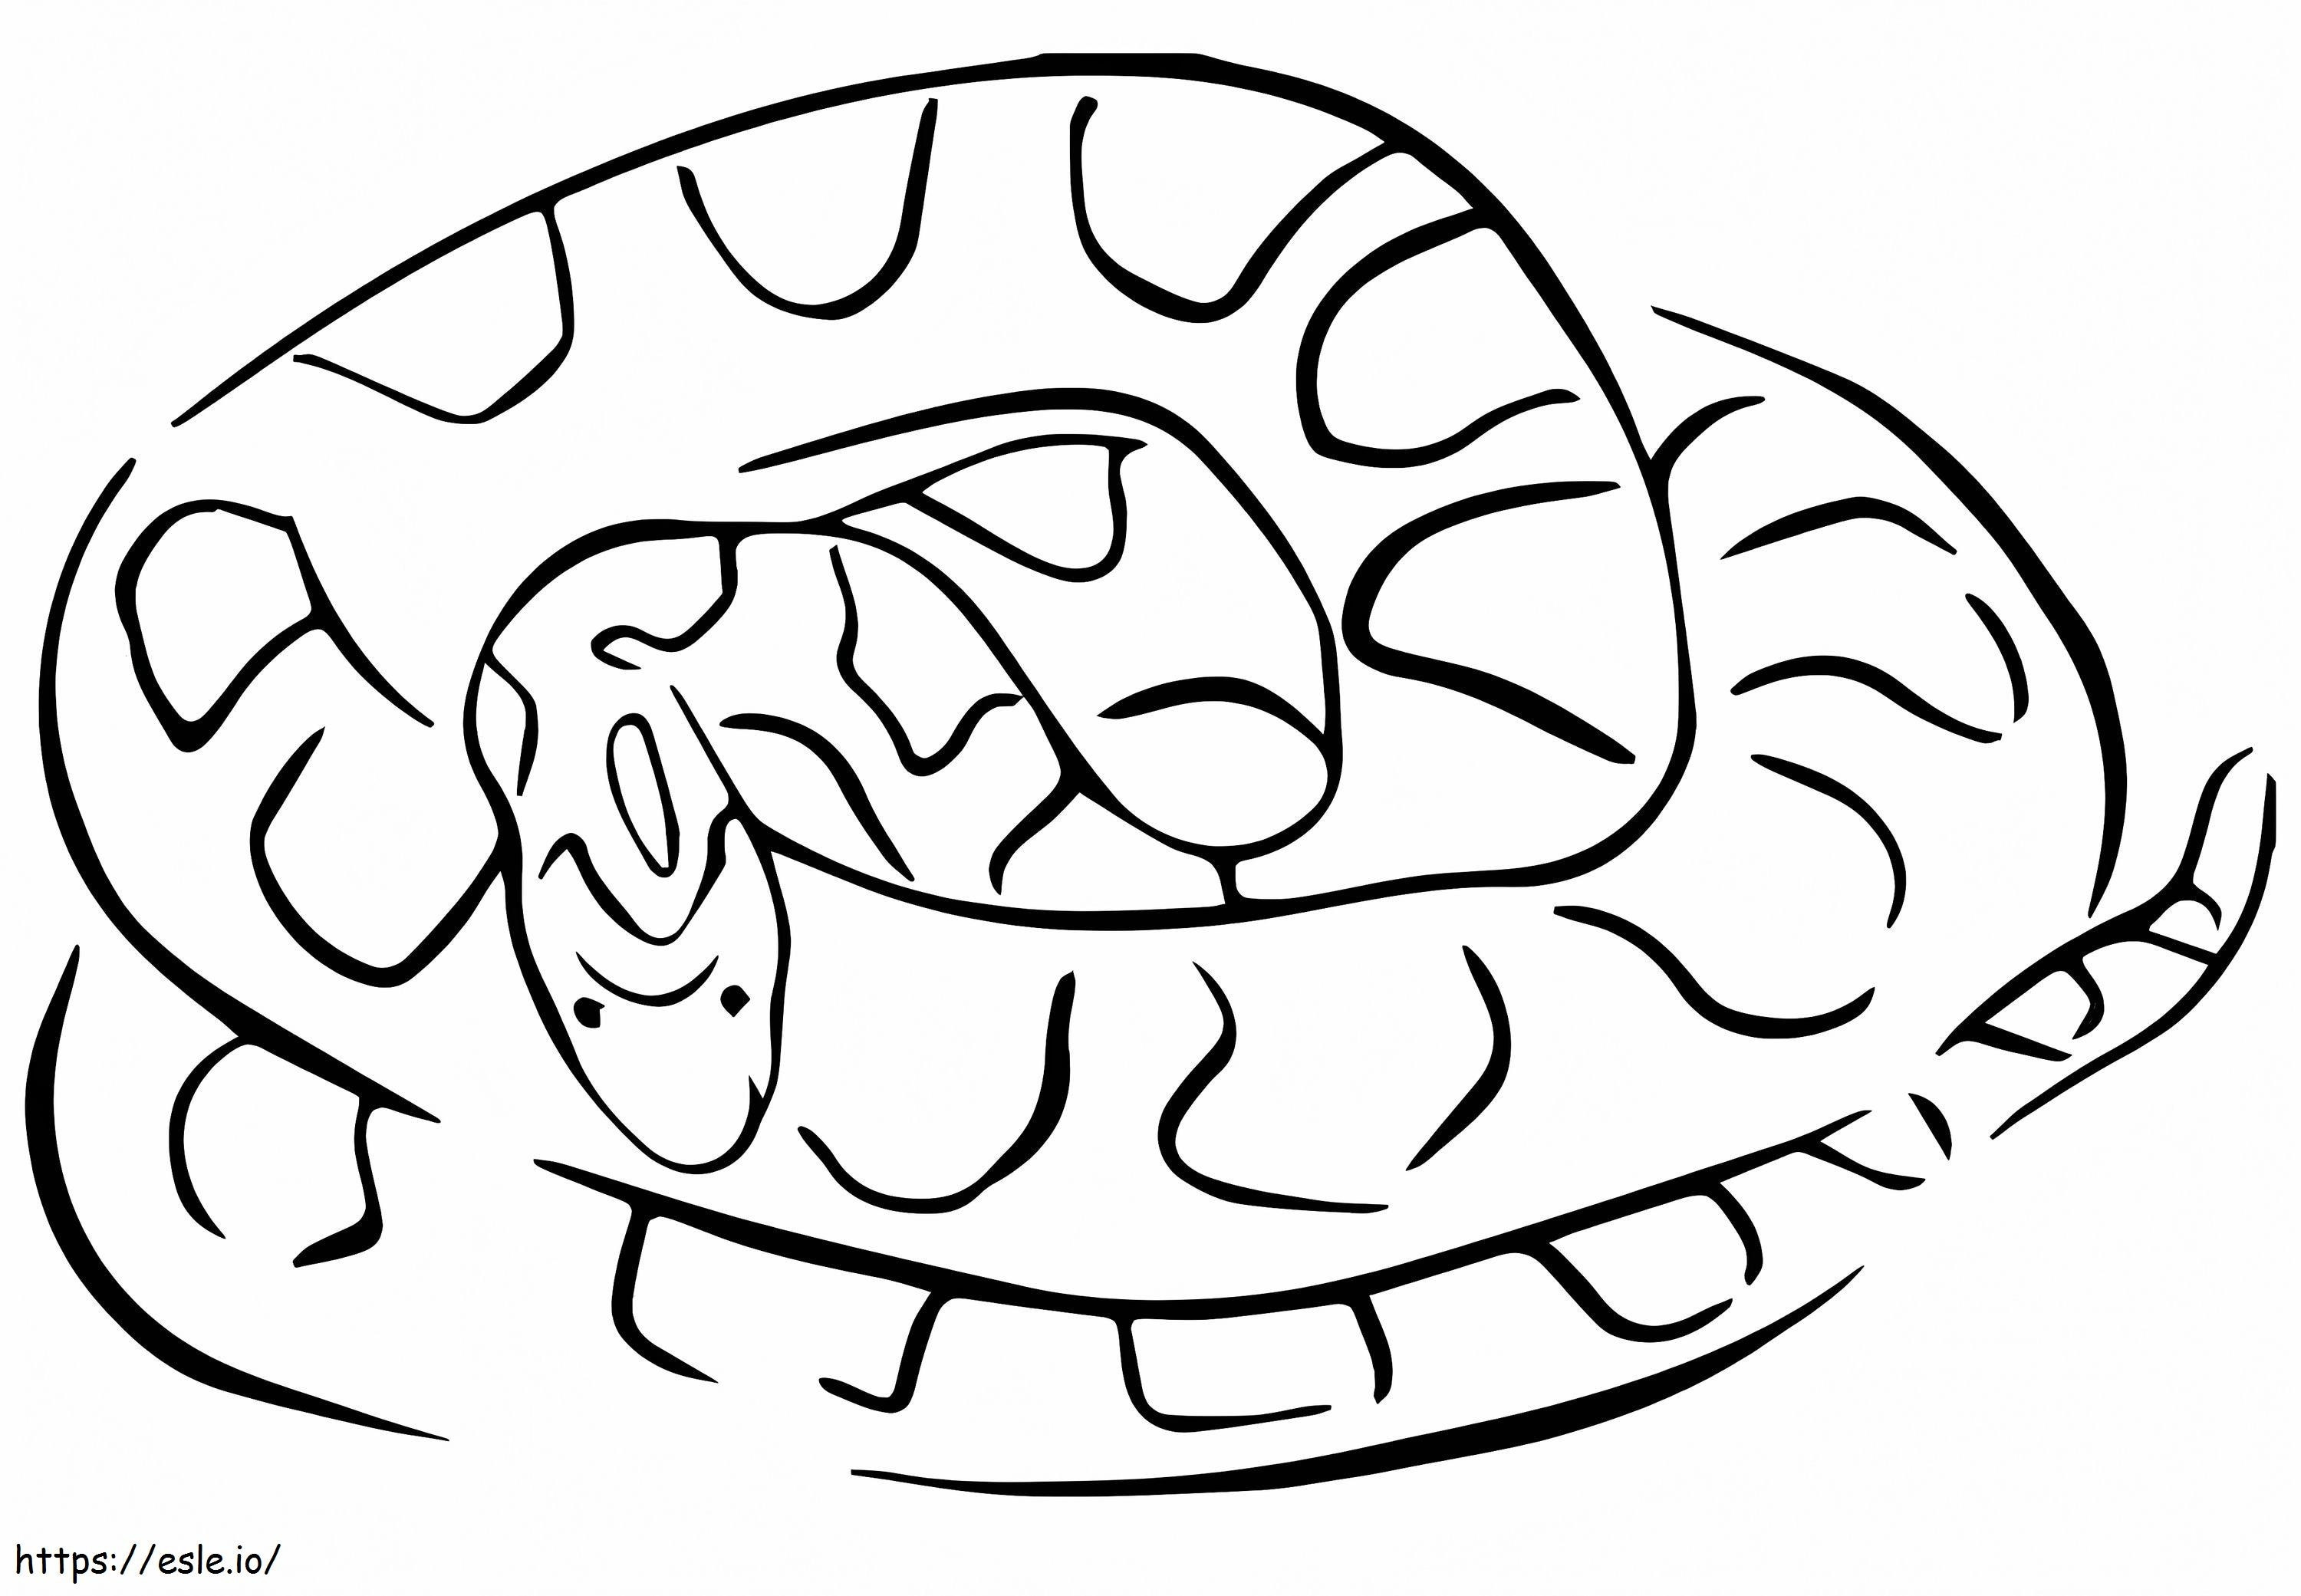 Corn Snake coloring page